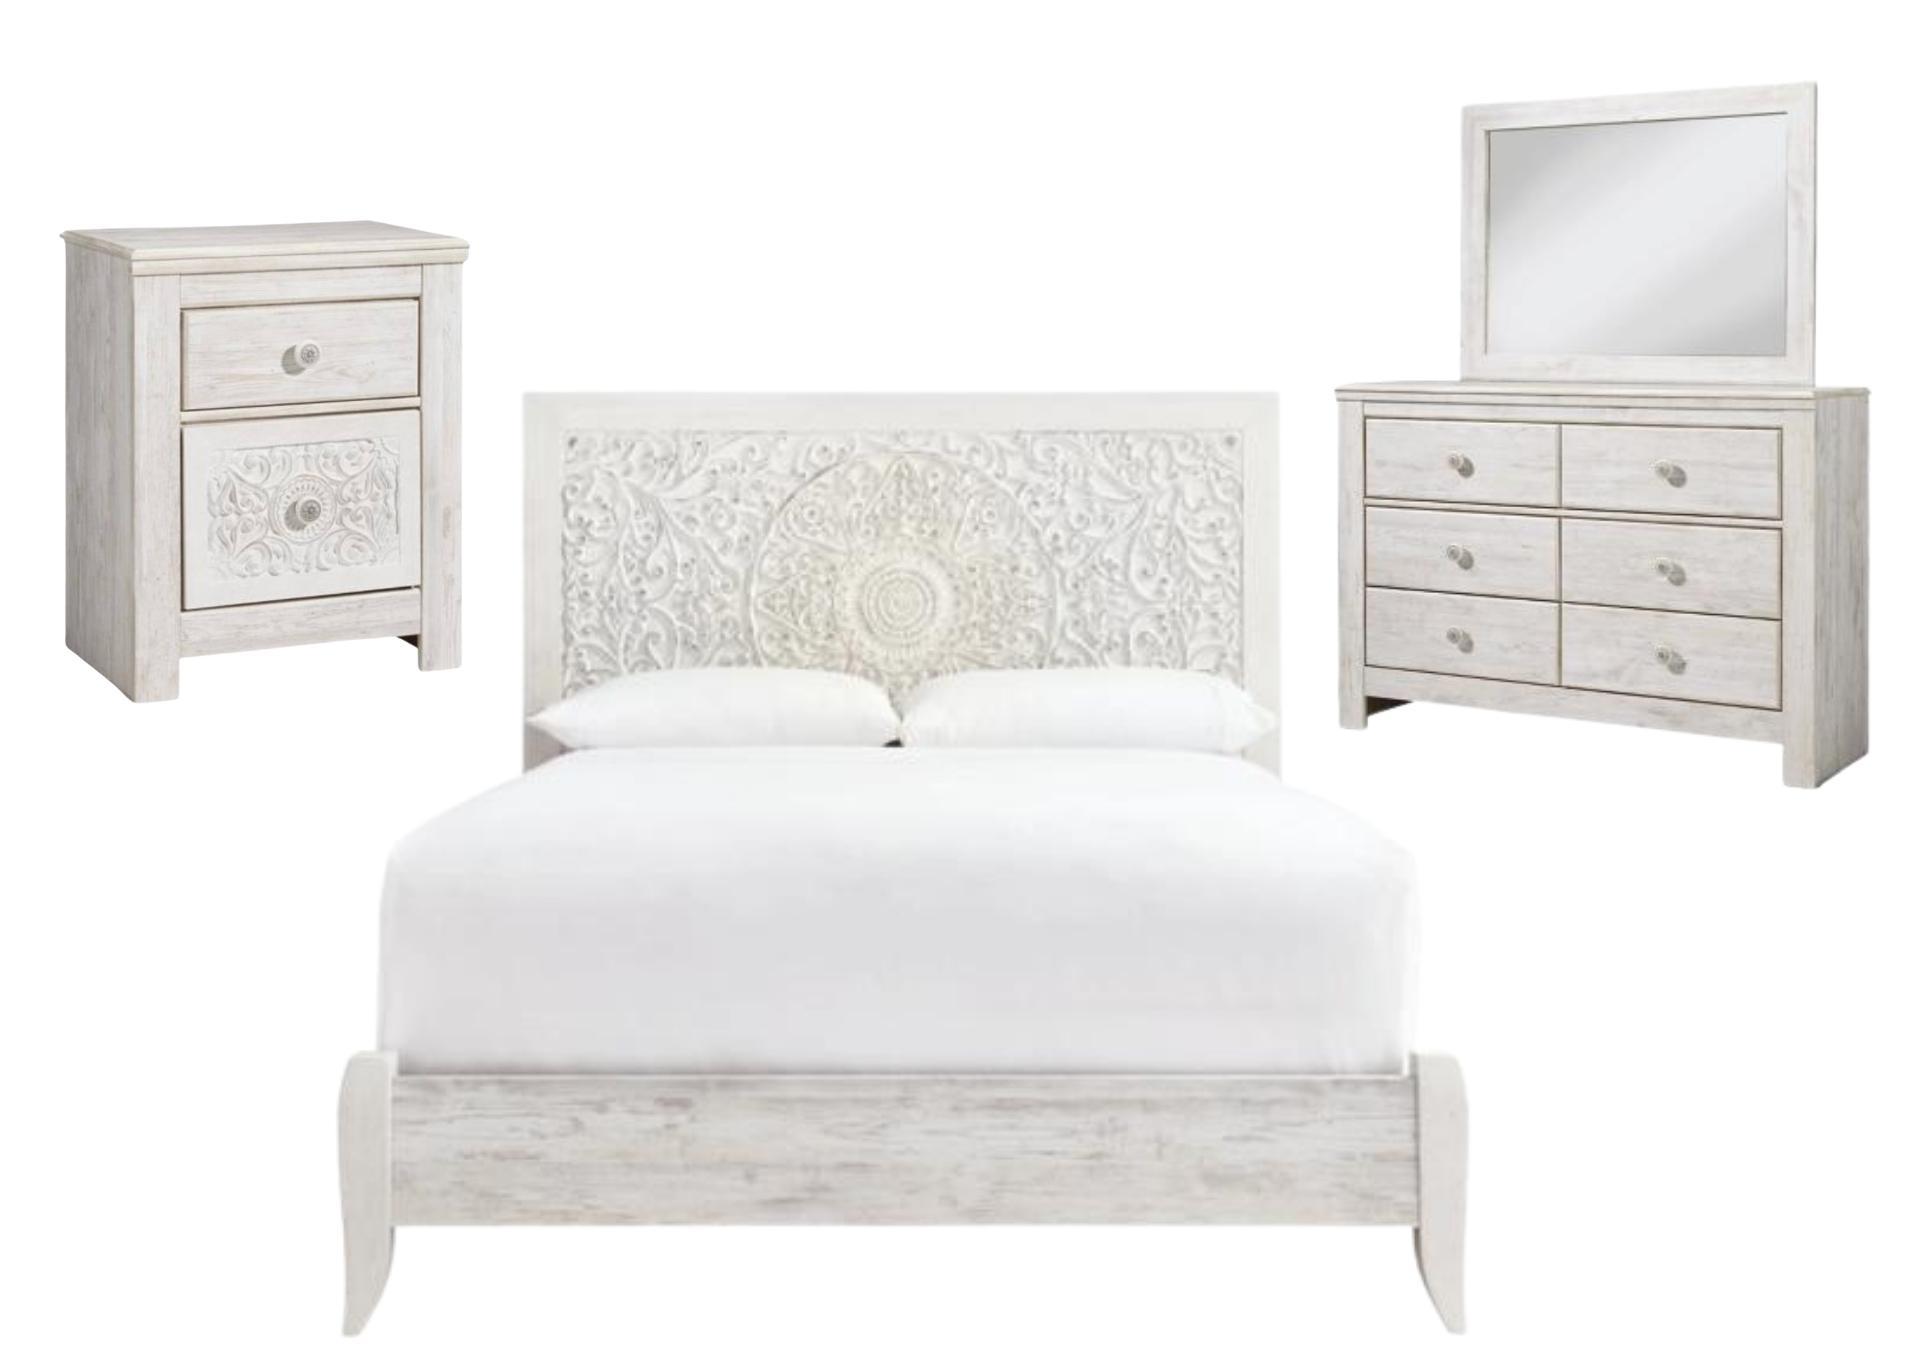 PAXBERRY QUEEN BEDROOM SET,ASHLEY FURNITURE INC.